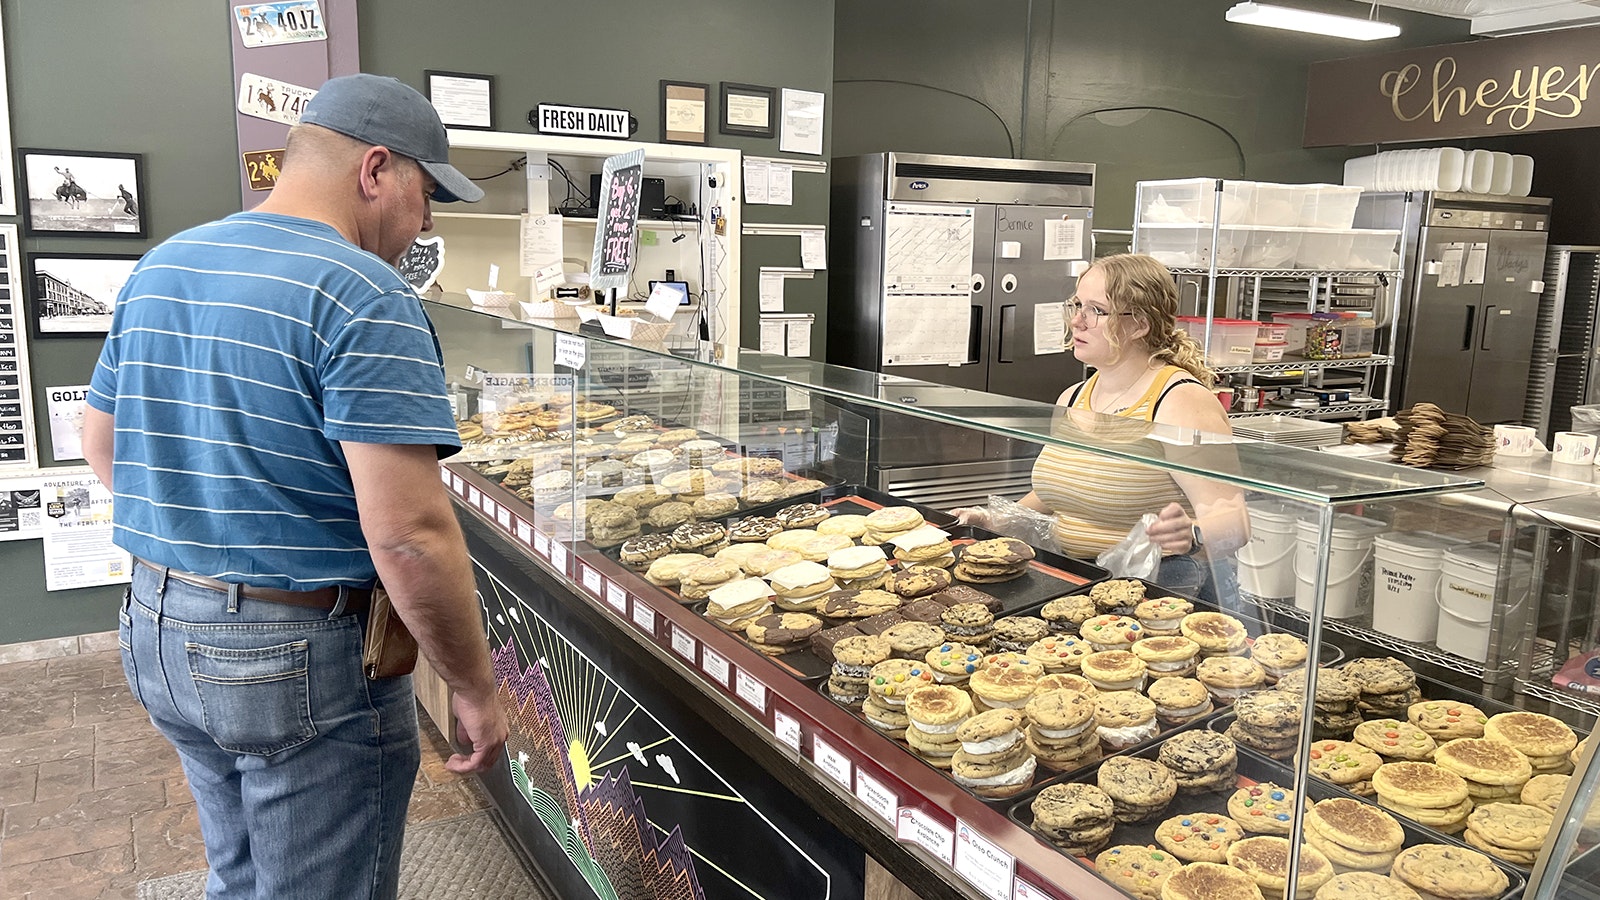 Morgan Sutherland, right, fills an order for Jeremy Dogged at Mary's Mountain Cookies in downtown Cheyenne on Monday. Sutherland said police and other emergency responders are welcome in the cookie shop.